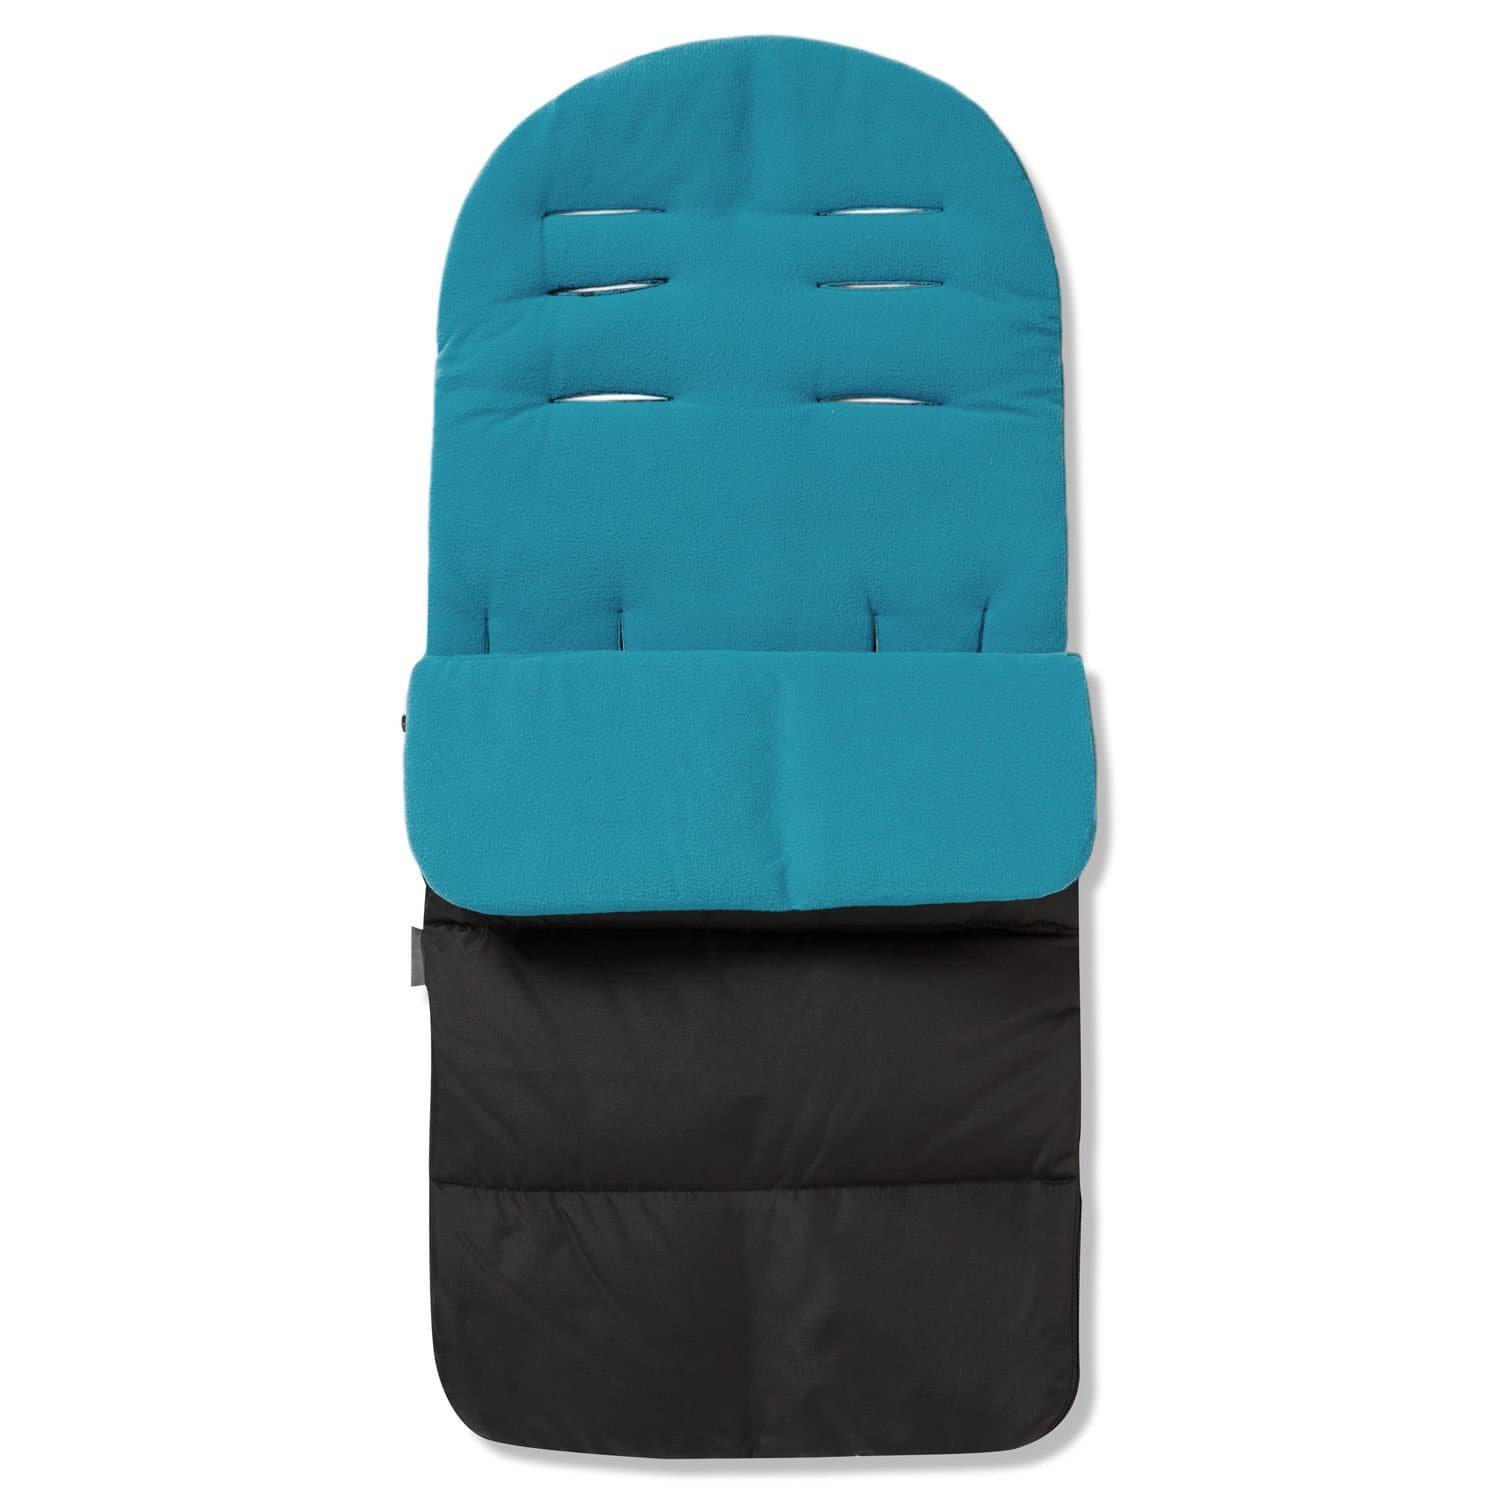 Premium Footmuff / Cosy Toes Compatible with Esprit - Ocean Blue / Fits All Models | For Your Little One